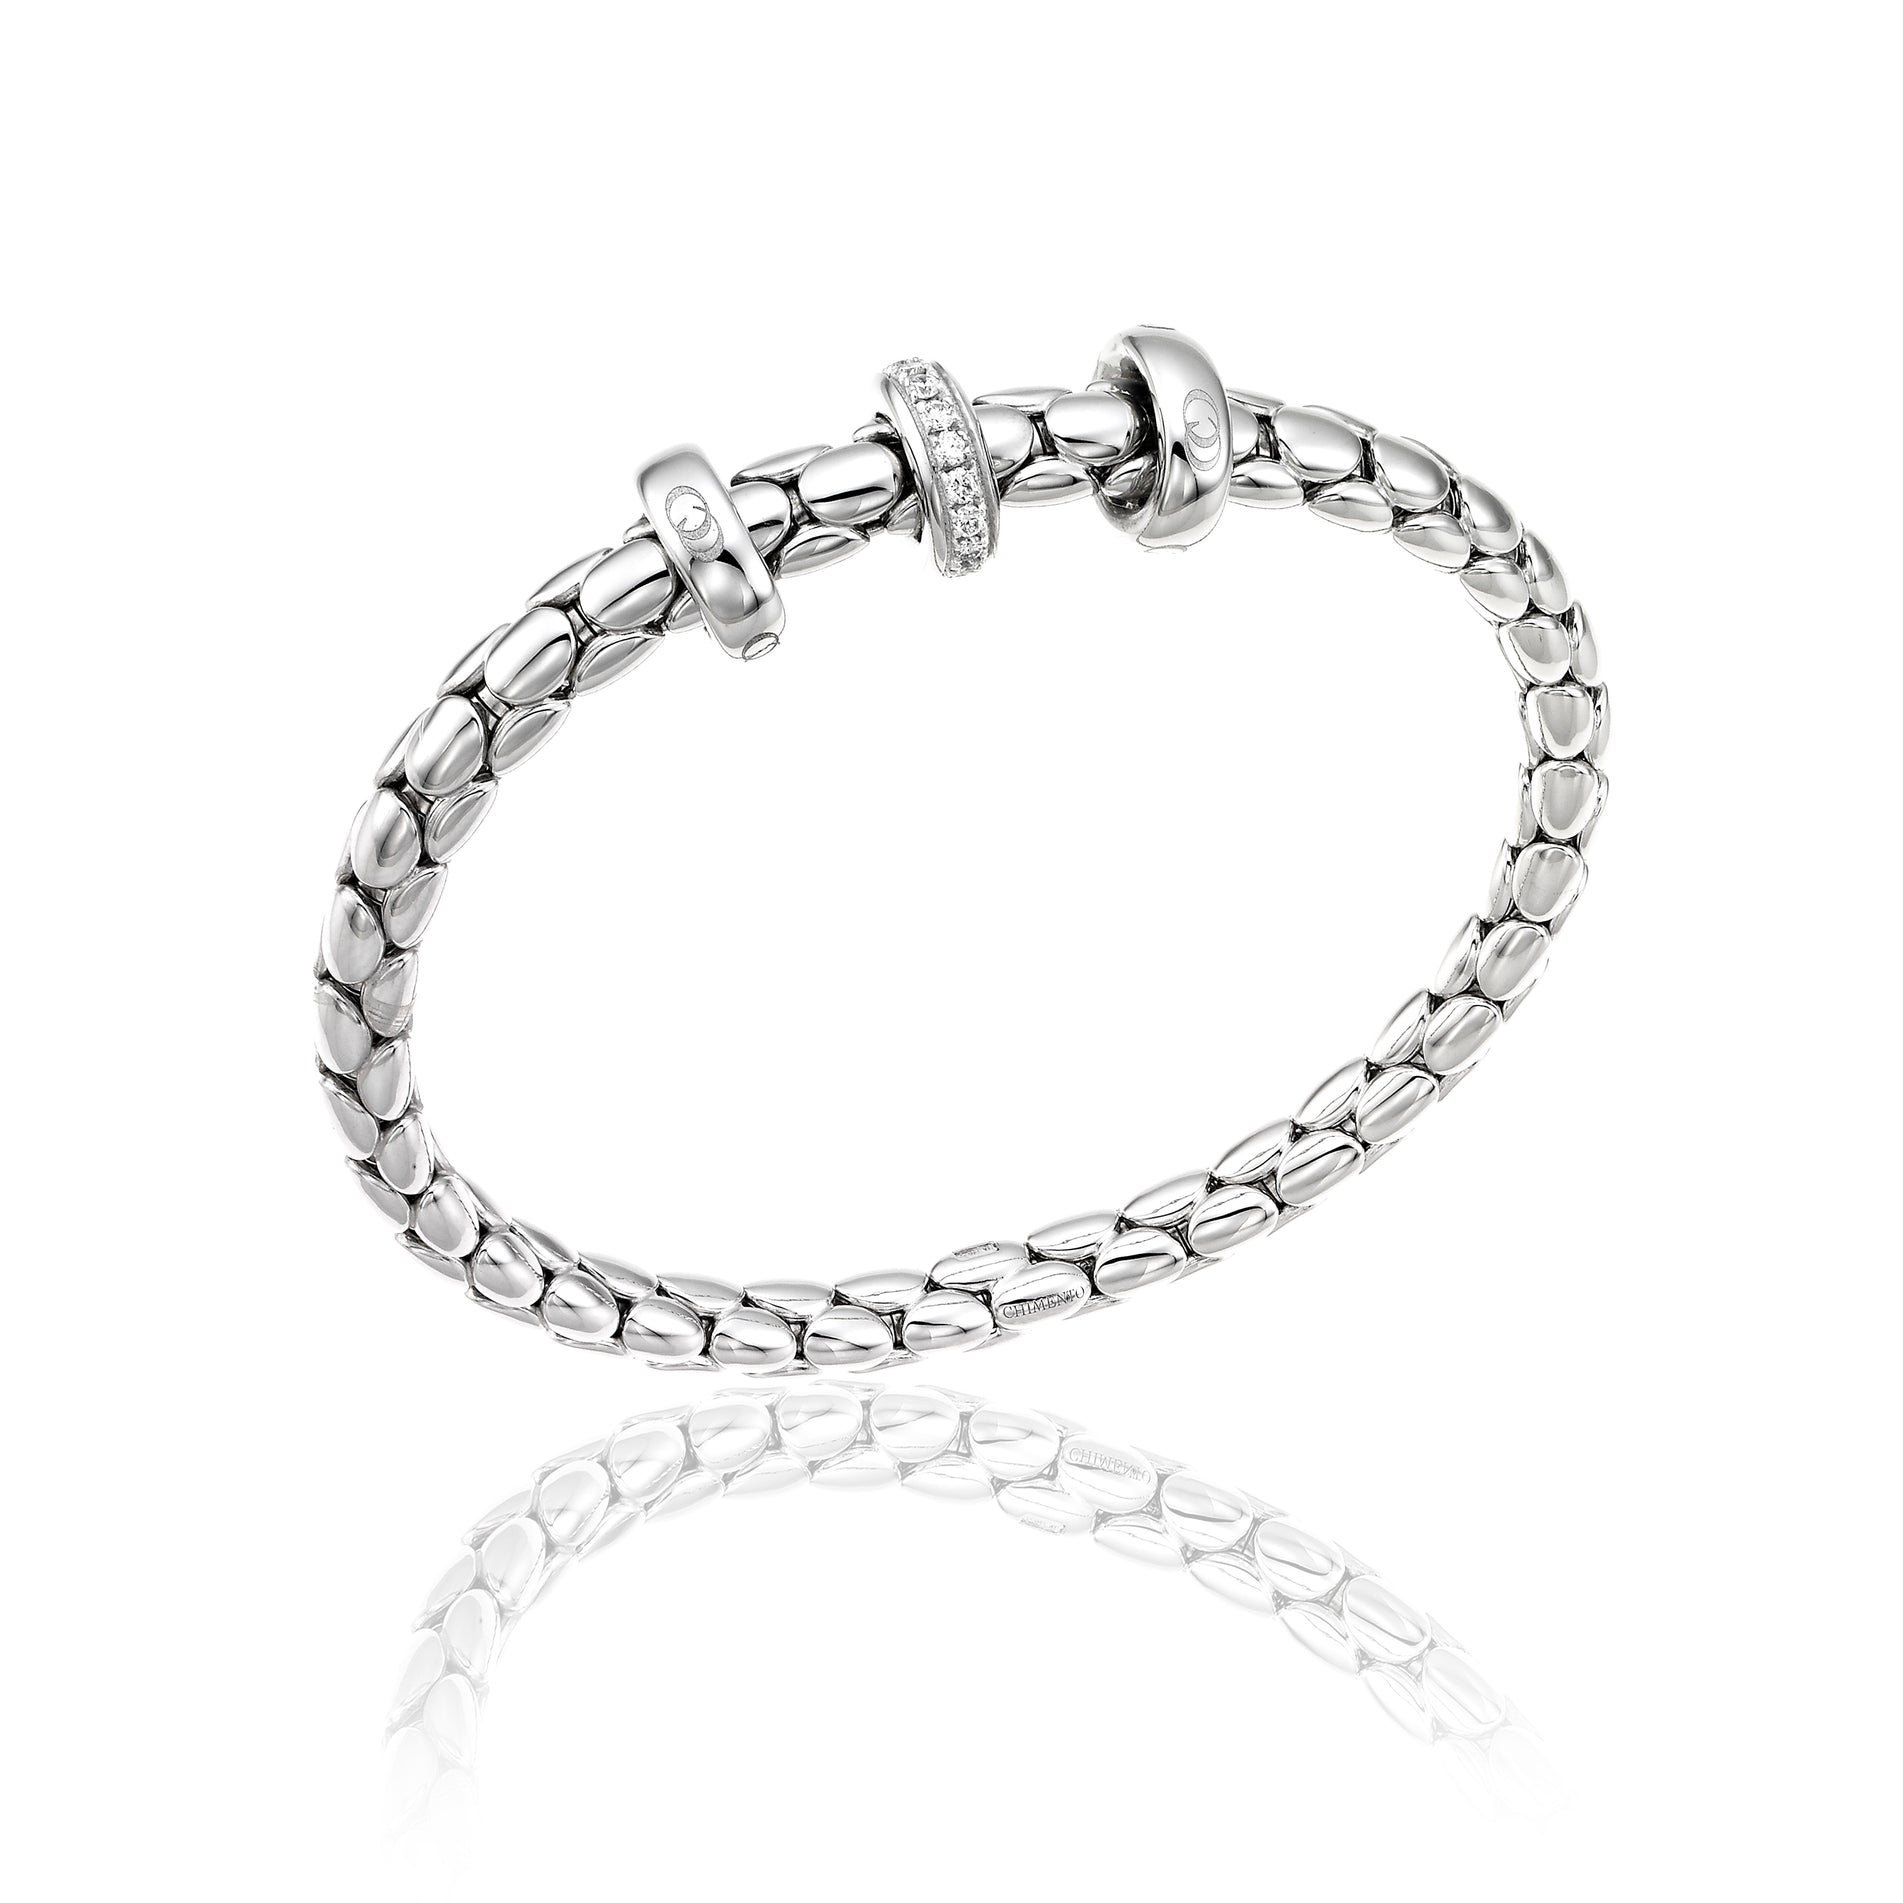 Chimento Stretch Spring Bracelet (Large, 3 Disc) in 18k White Gold with White Diamonds - Orsini Jewellers